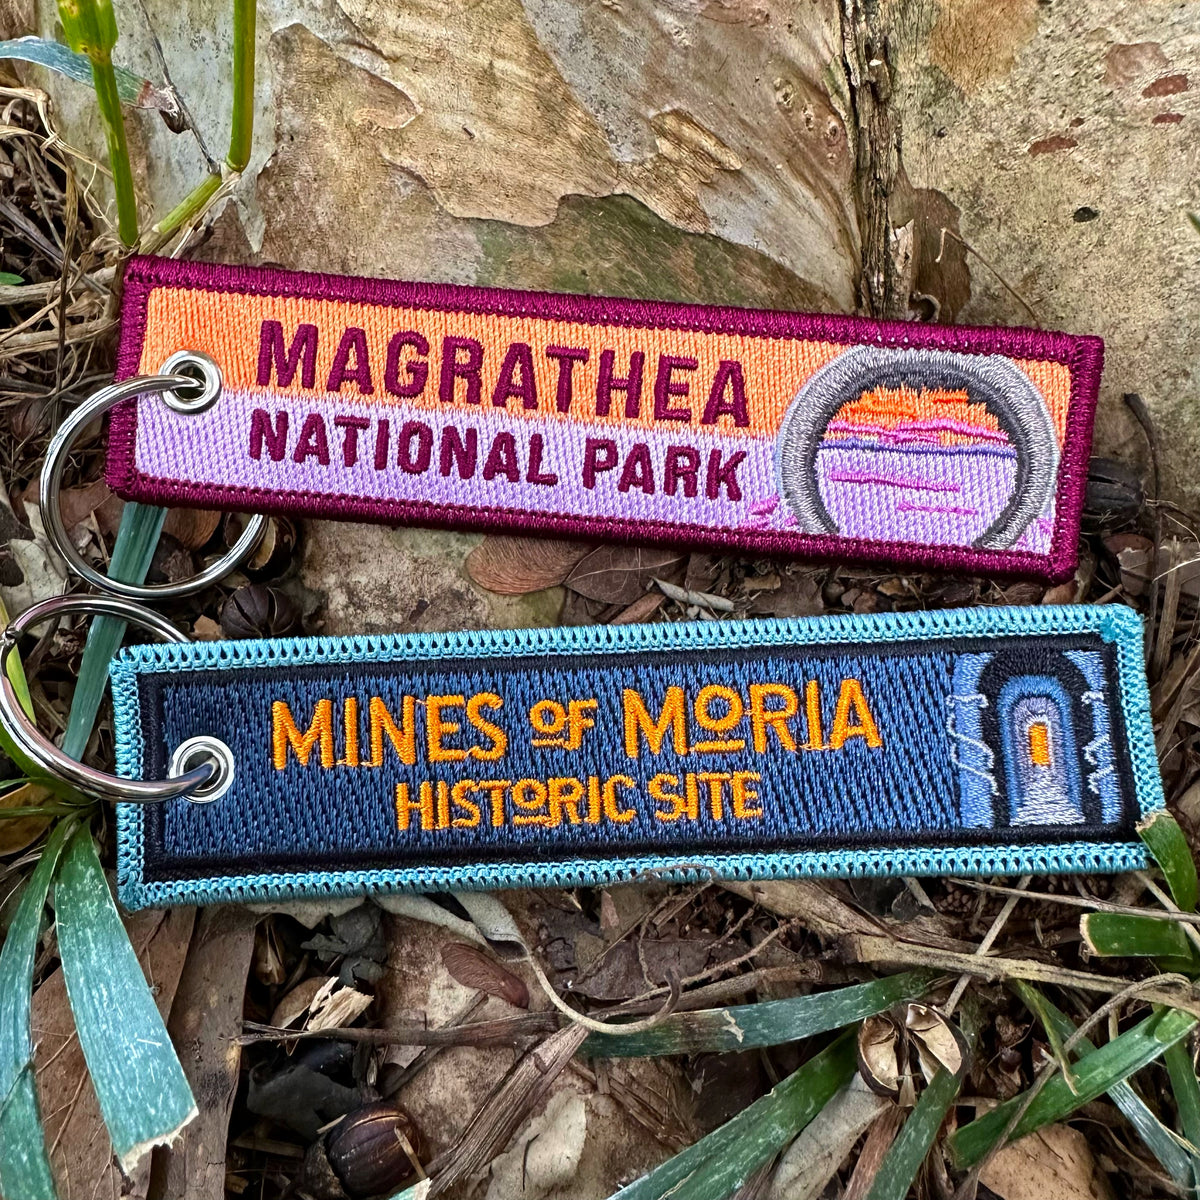 The Midnight Society - Fictional National Park Outpost Update: NEW Patches  & Key Tags have arrived! 🍂 Link in bio! While supplies last!